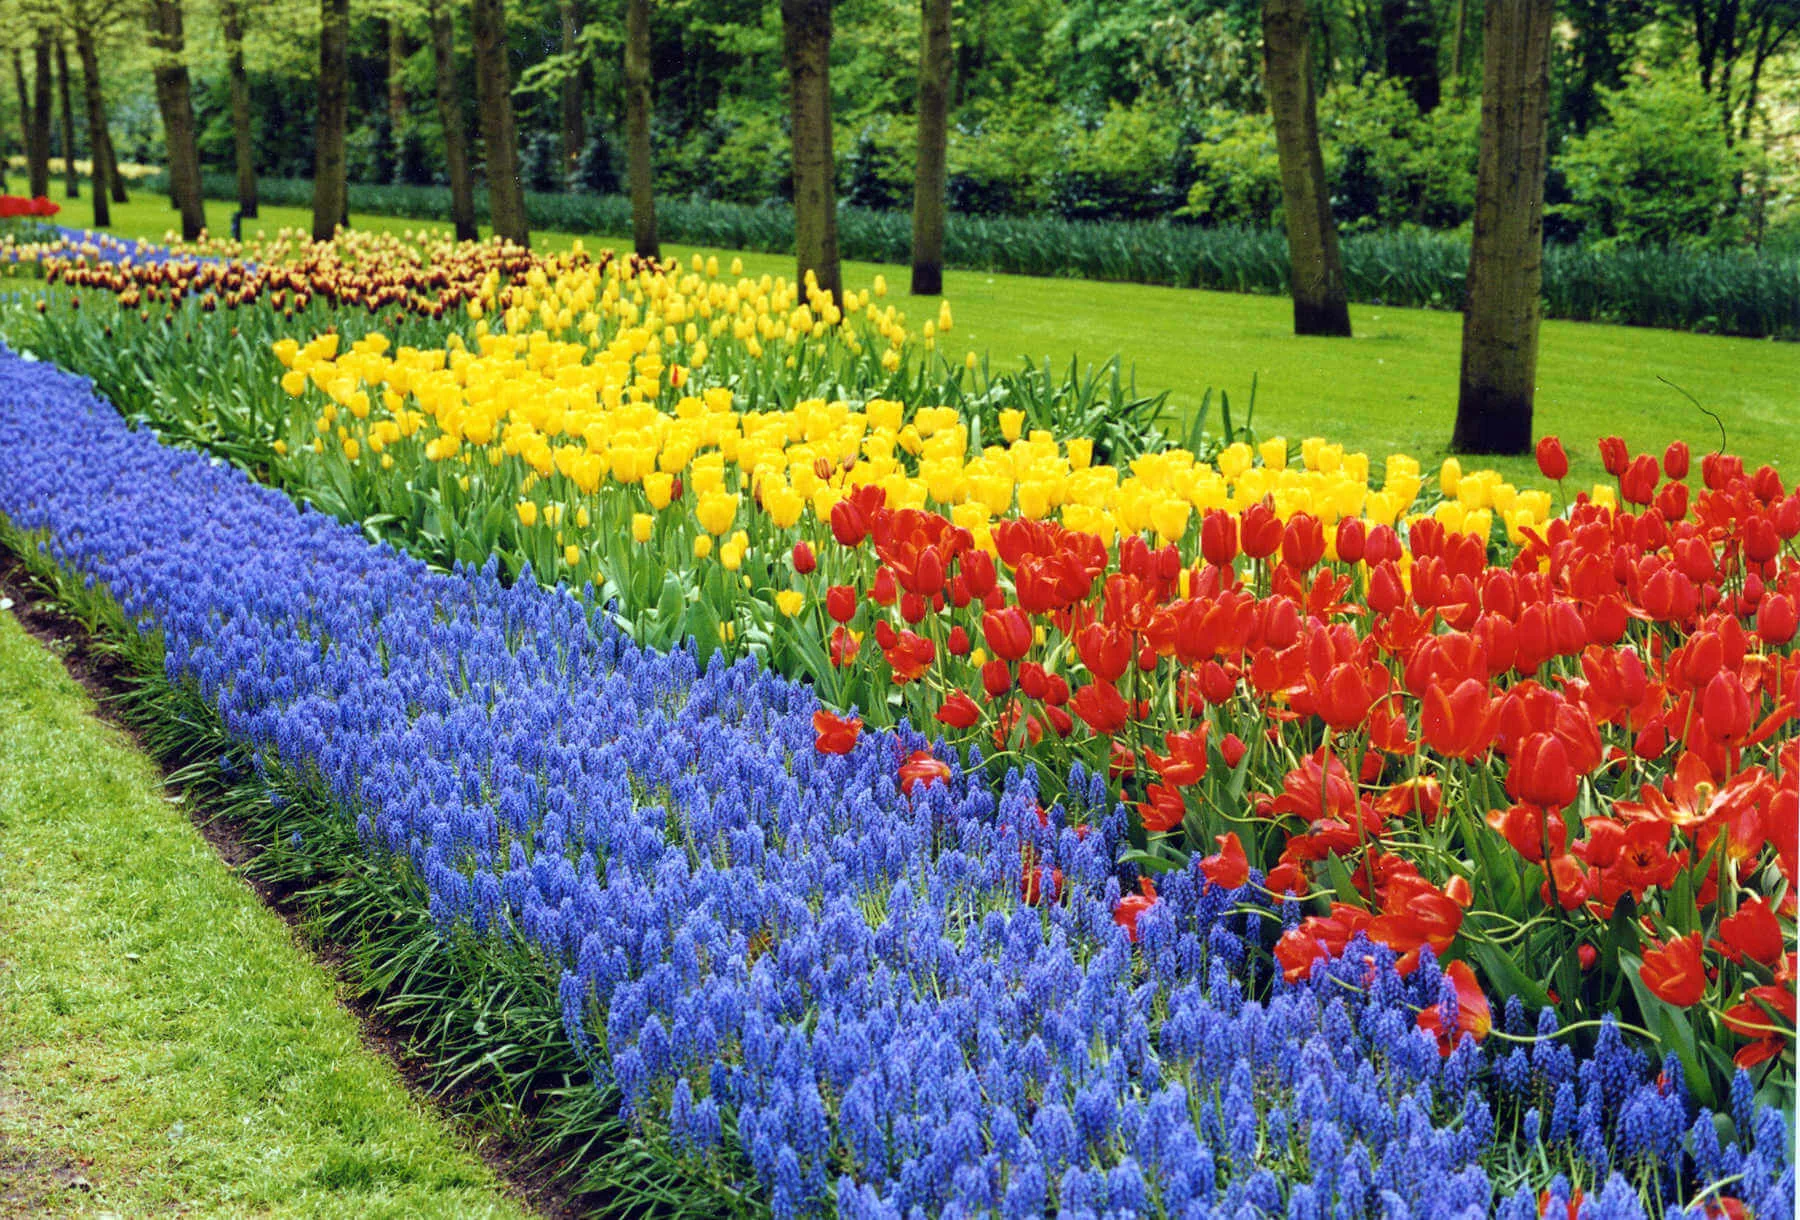 If you time your trip to the Netherlands just right, the gardens at Keukenhof will be if full blooming splendor